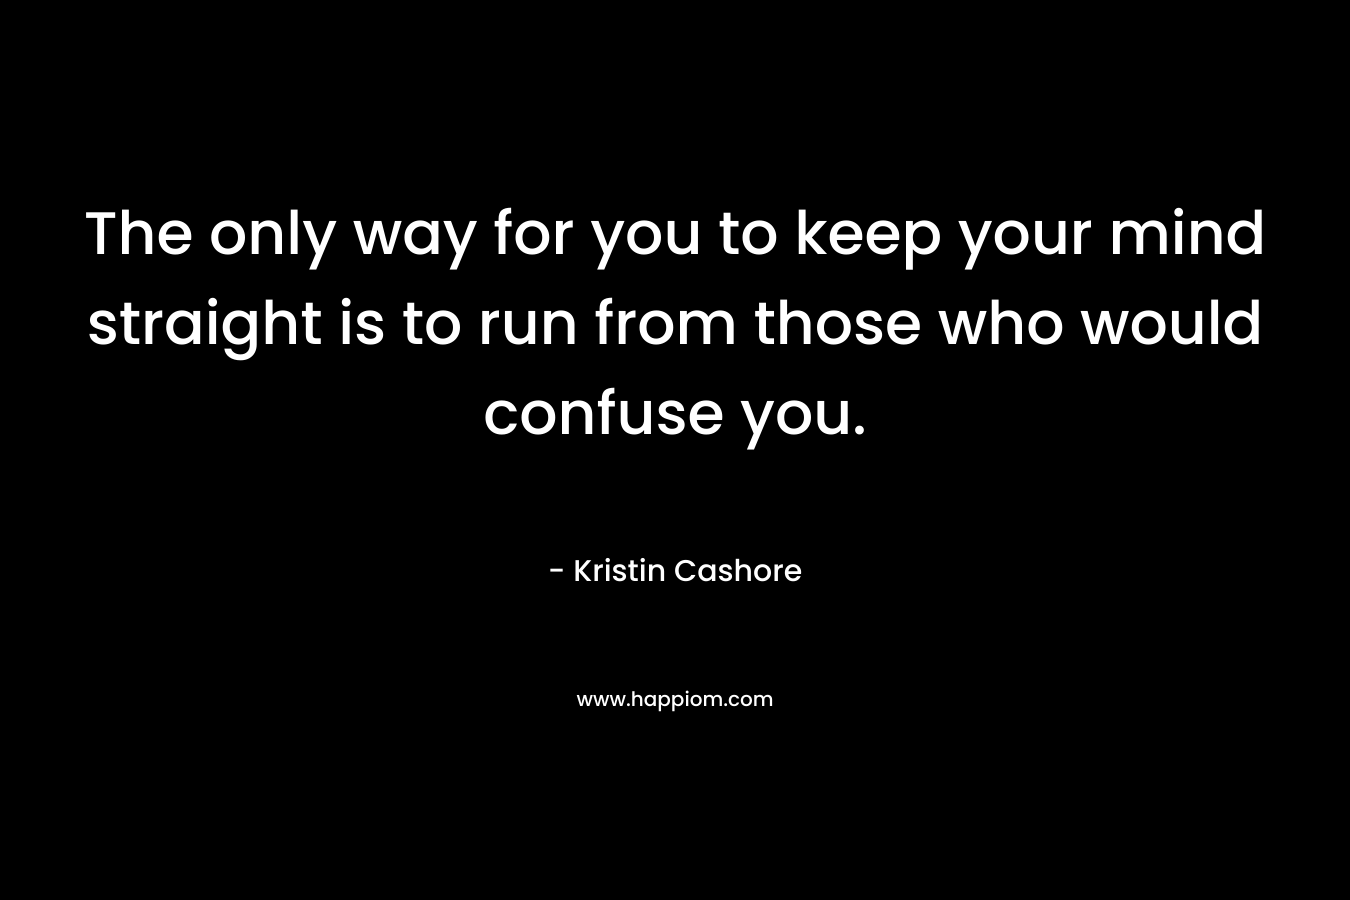 The only way for you to keep your mind straight is to run from those who would confuse you.